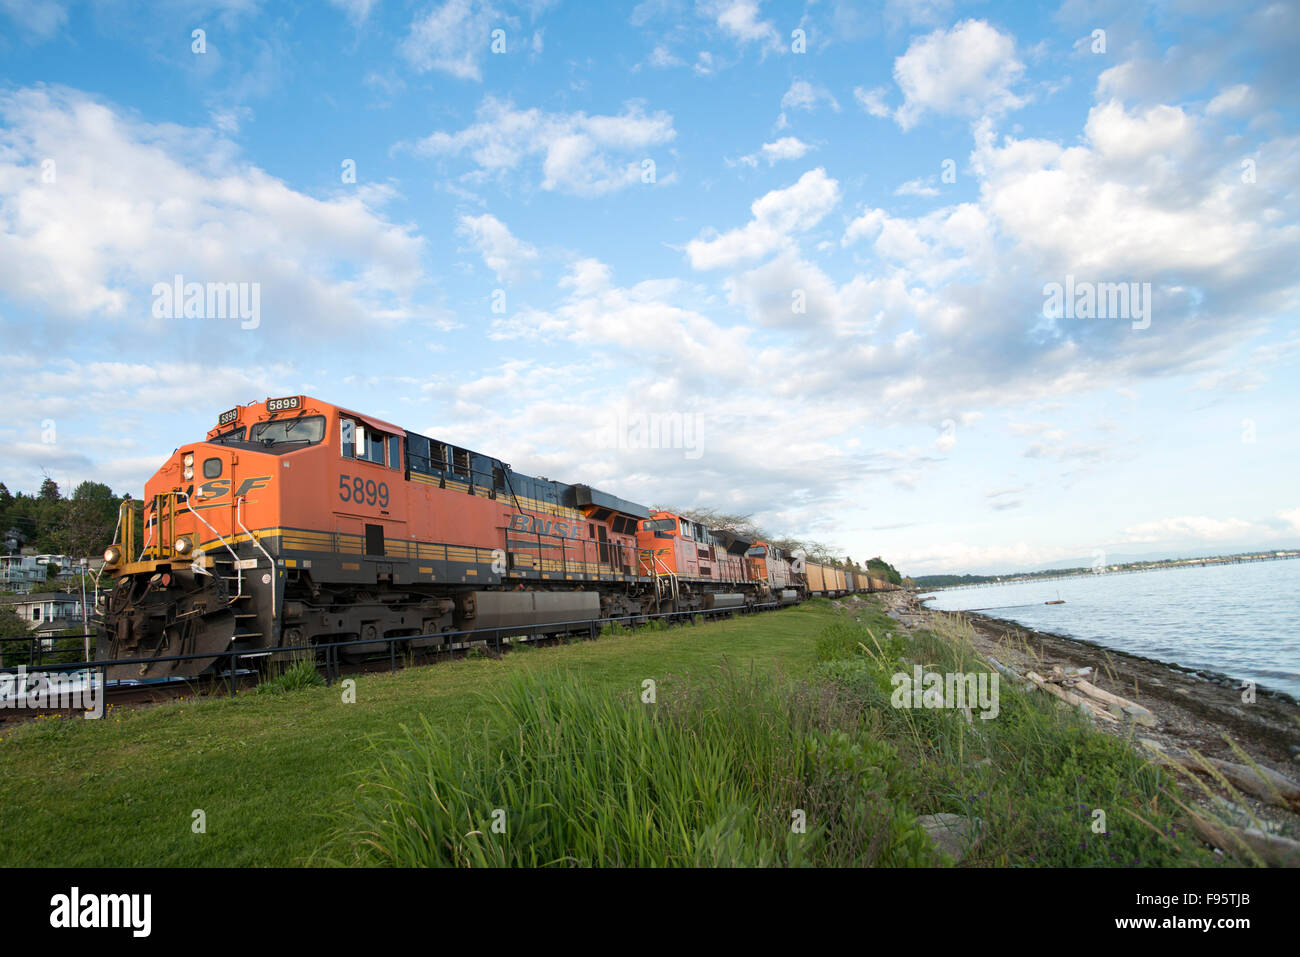 A BNSF coal train passes through the ocean side community of White Rock, British Columbia, Canada. This train originated in the Stock Photo